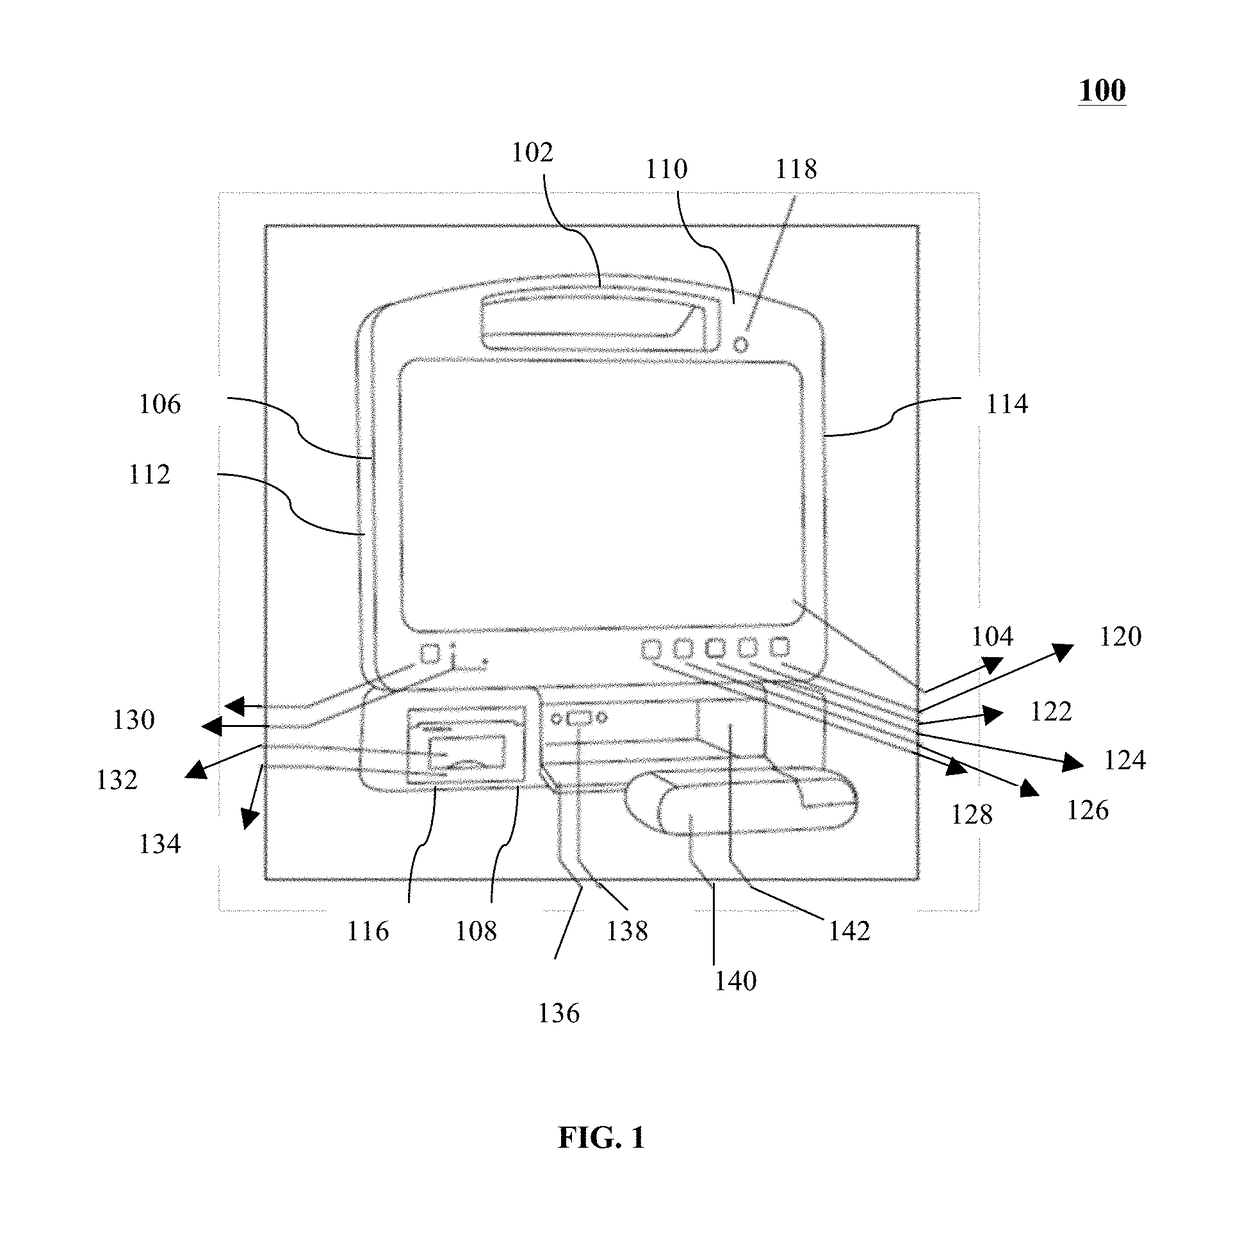 Portable tele-monitoring health care system and method